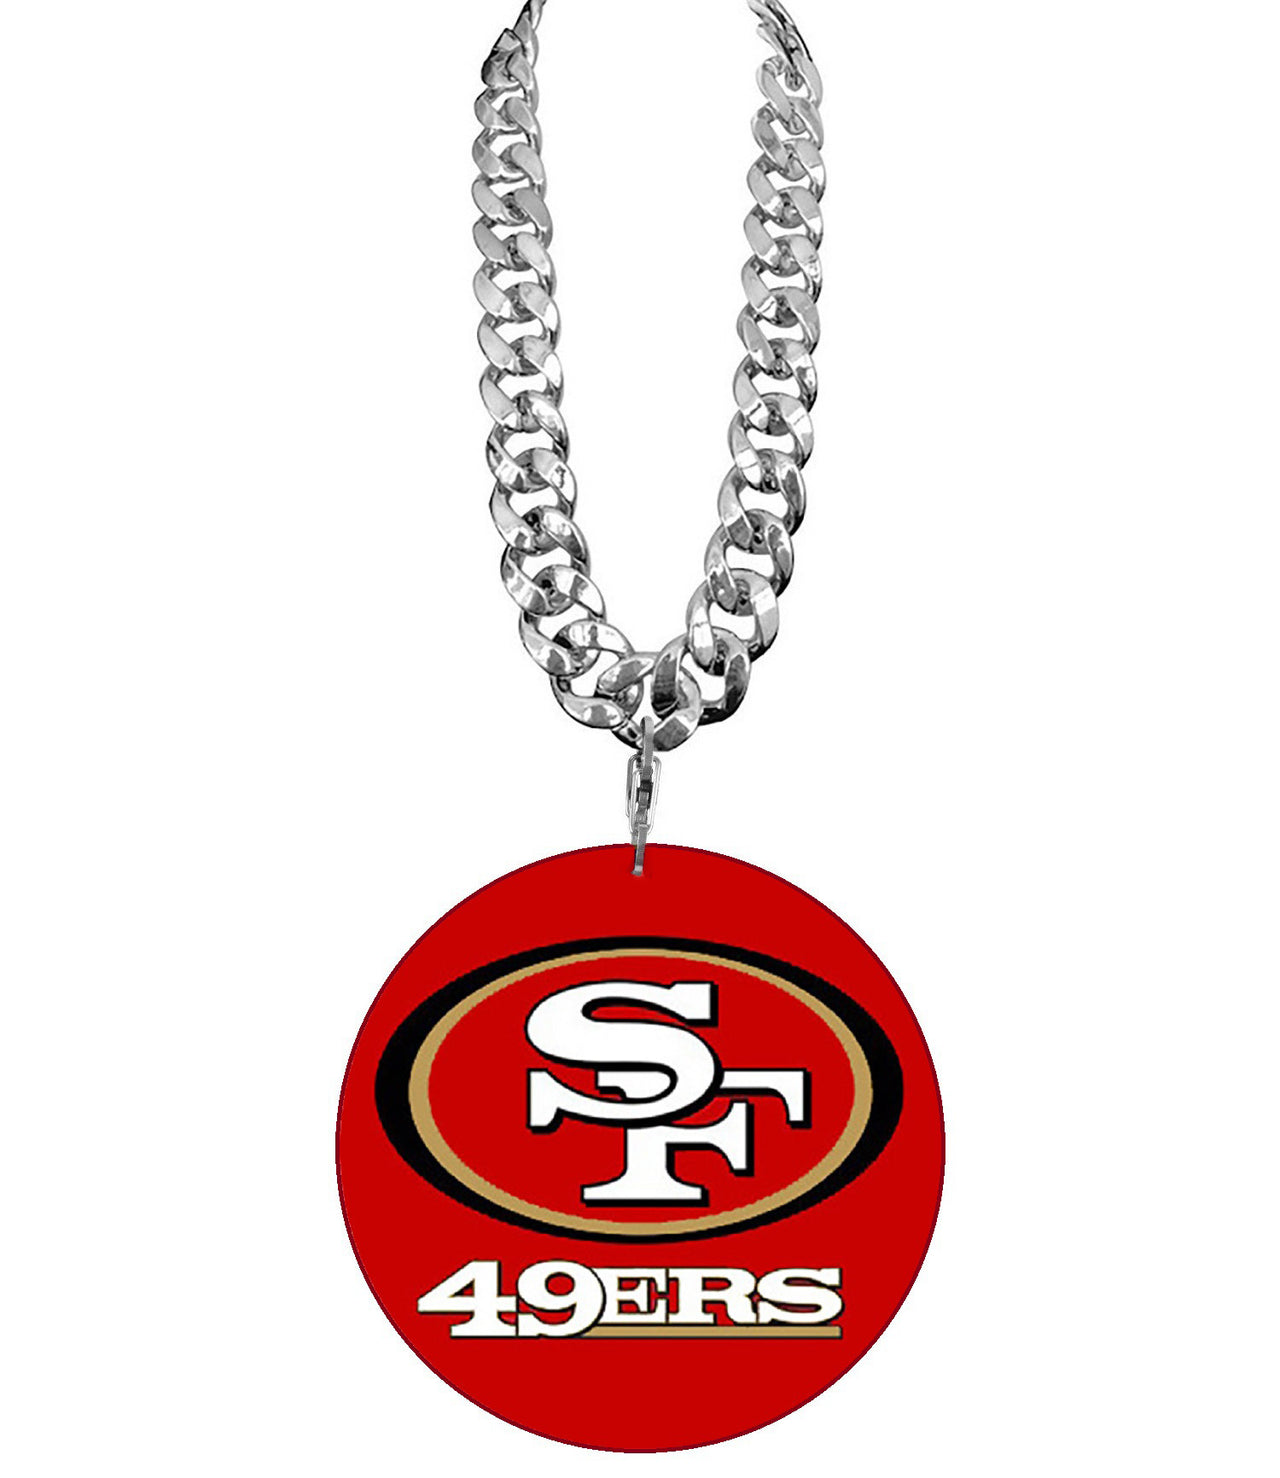 San Francisco 49ers Gear. $5 OFF Use Coupon Code FIRSTTIMEBUYER.